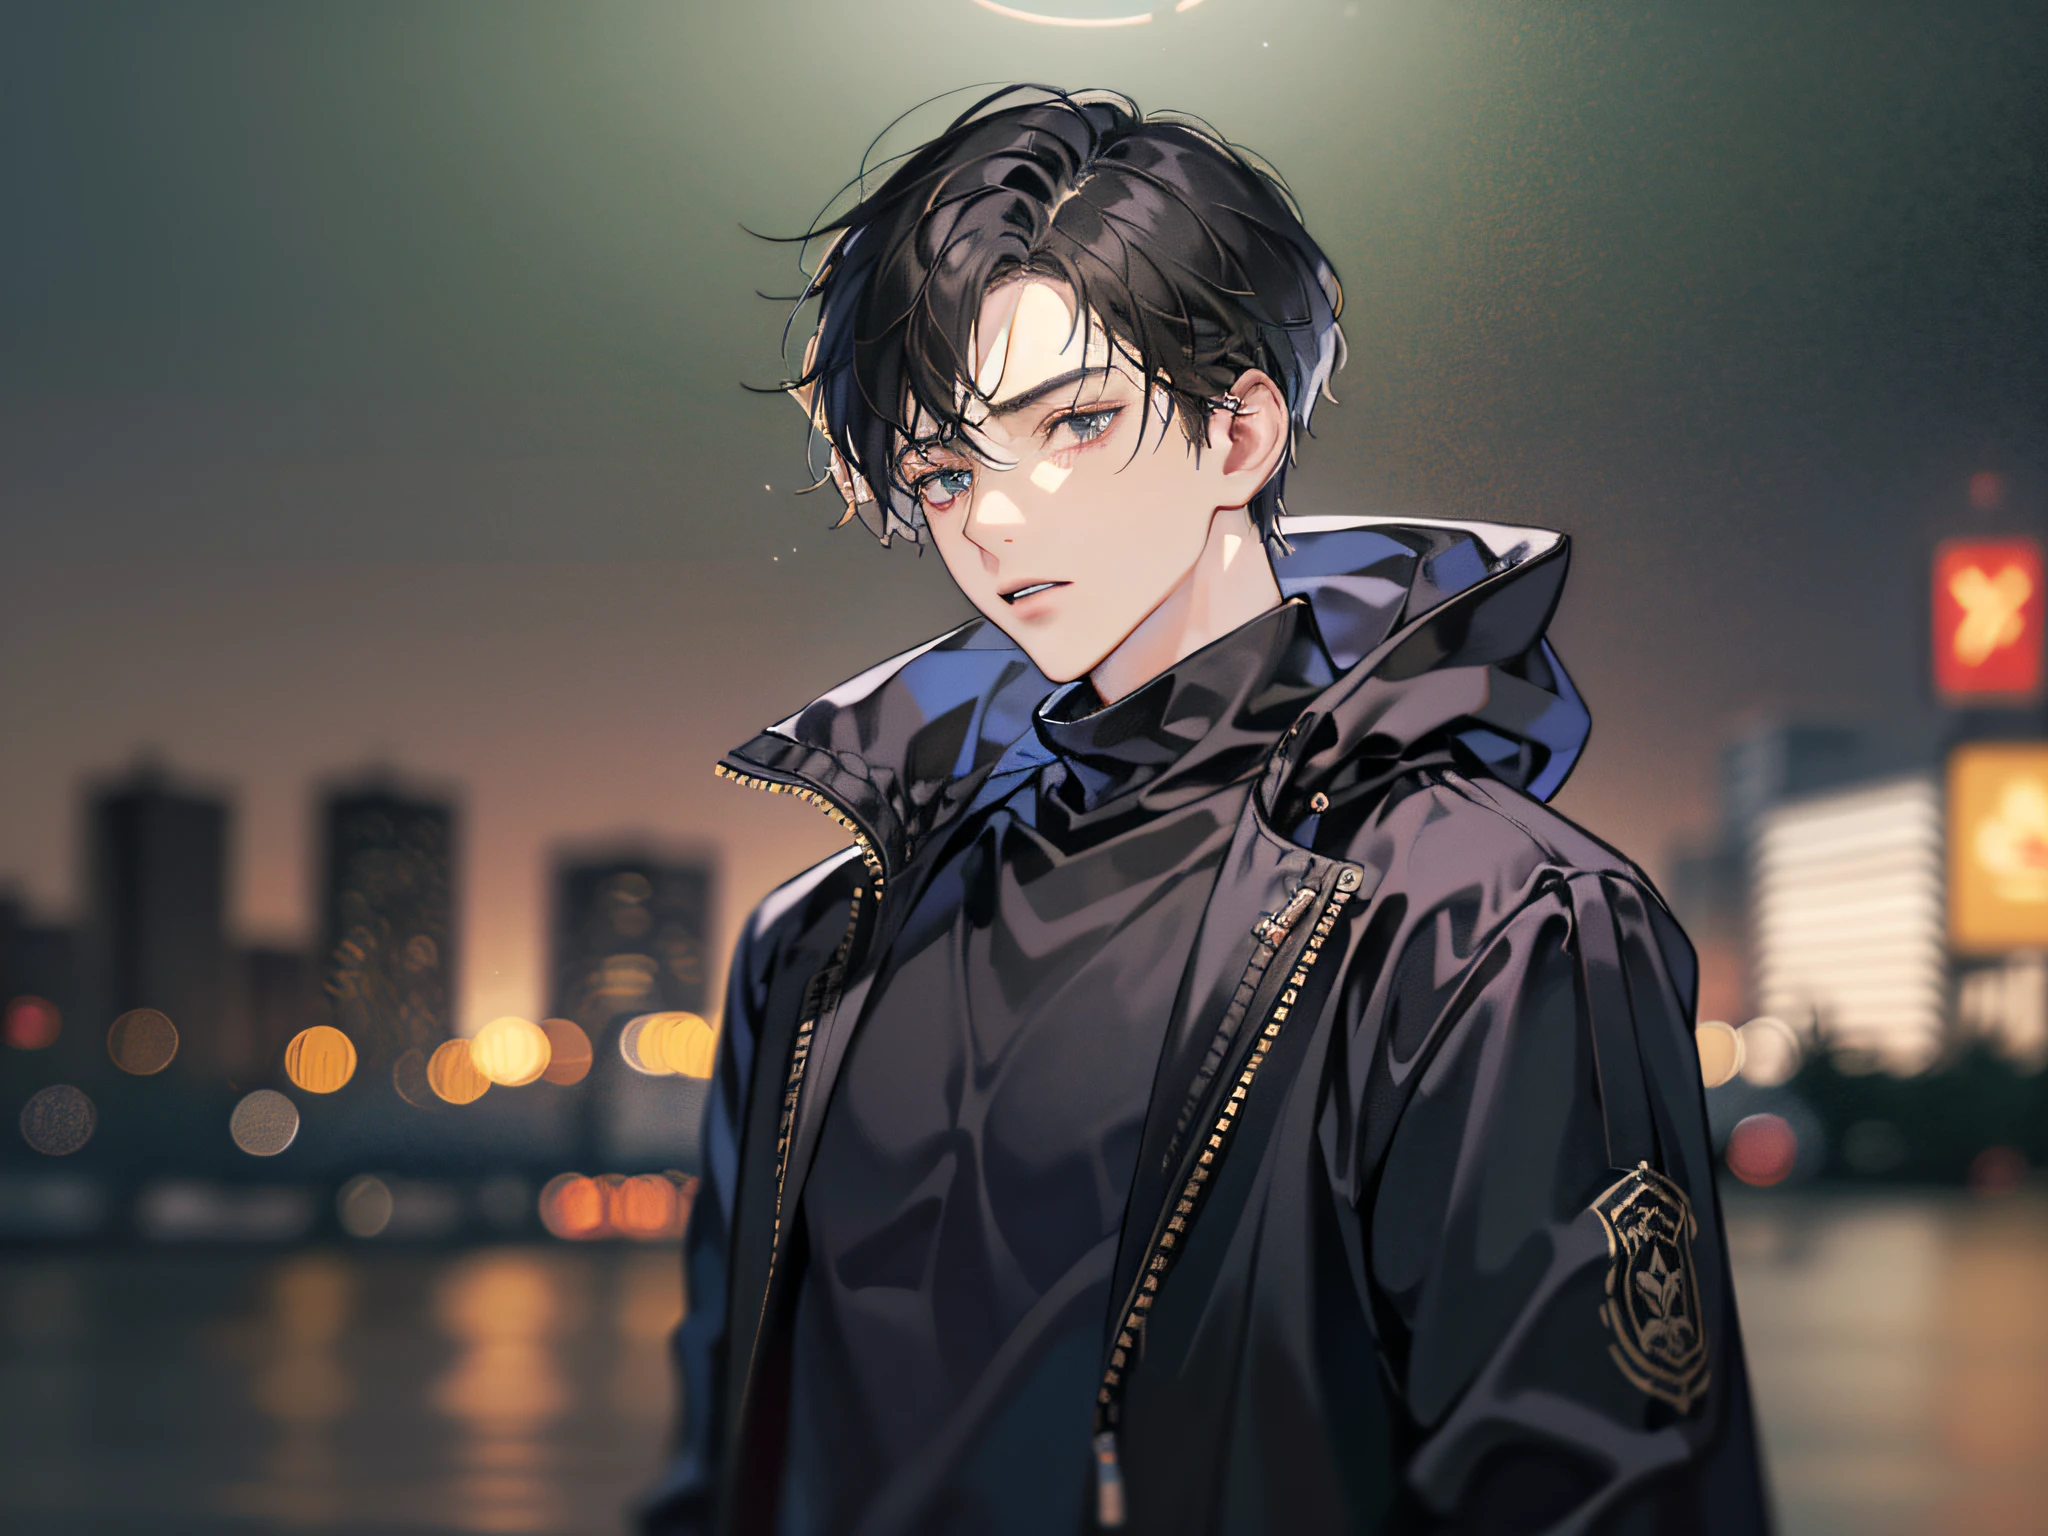 (best quality,highres,masterpiece:1.2),detailed painting,20-year-old man,upper body,black hair,black-eyed,moody,wearing a sweatshirt,background is a town,medium:oil painting,detailed cityscape,dark and gloomy atmosphere,vivid colors,sharp focus,studio lighting